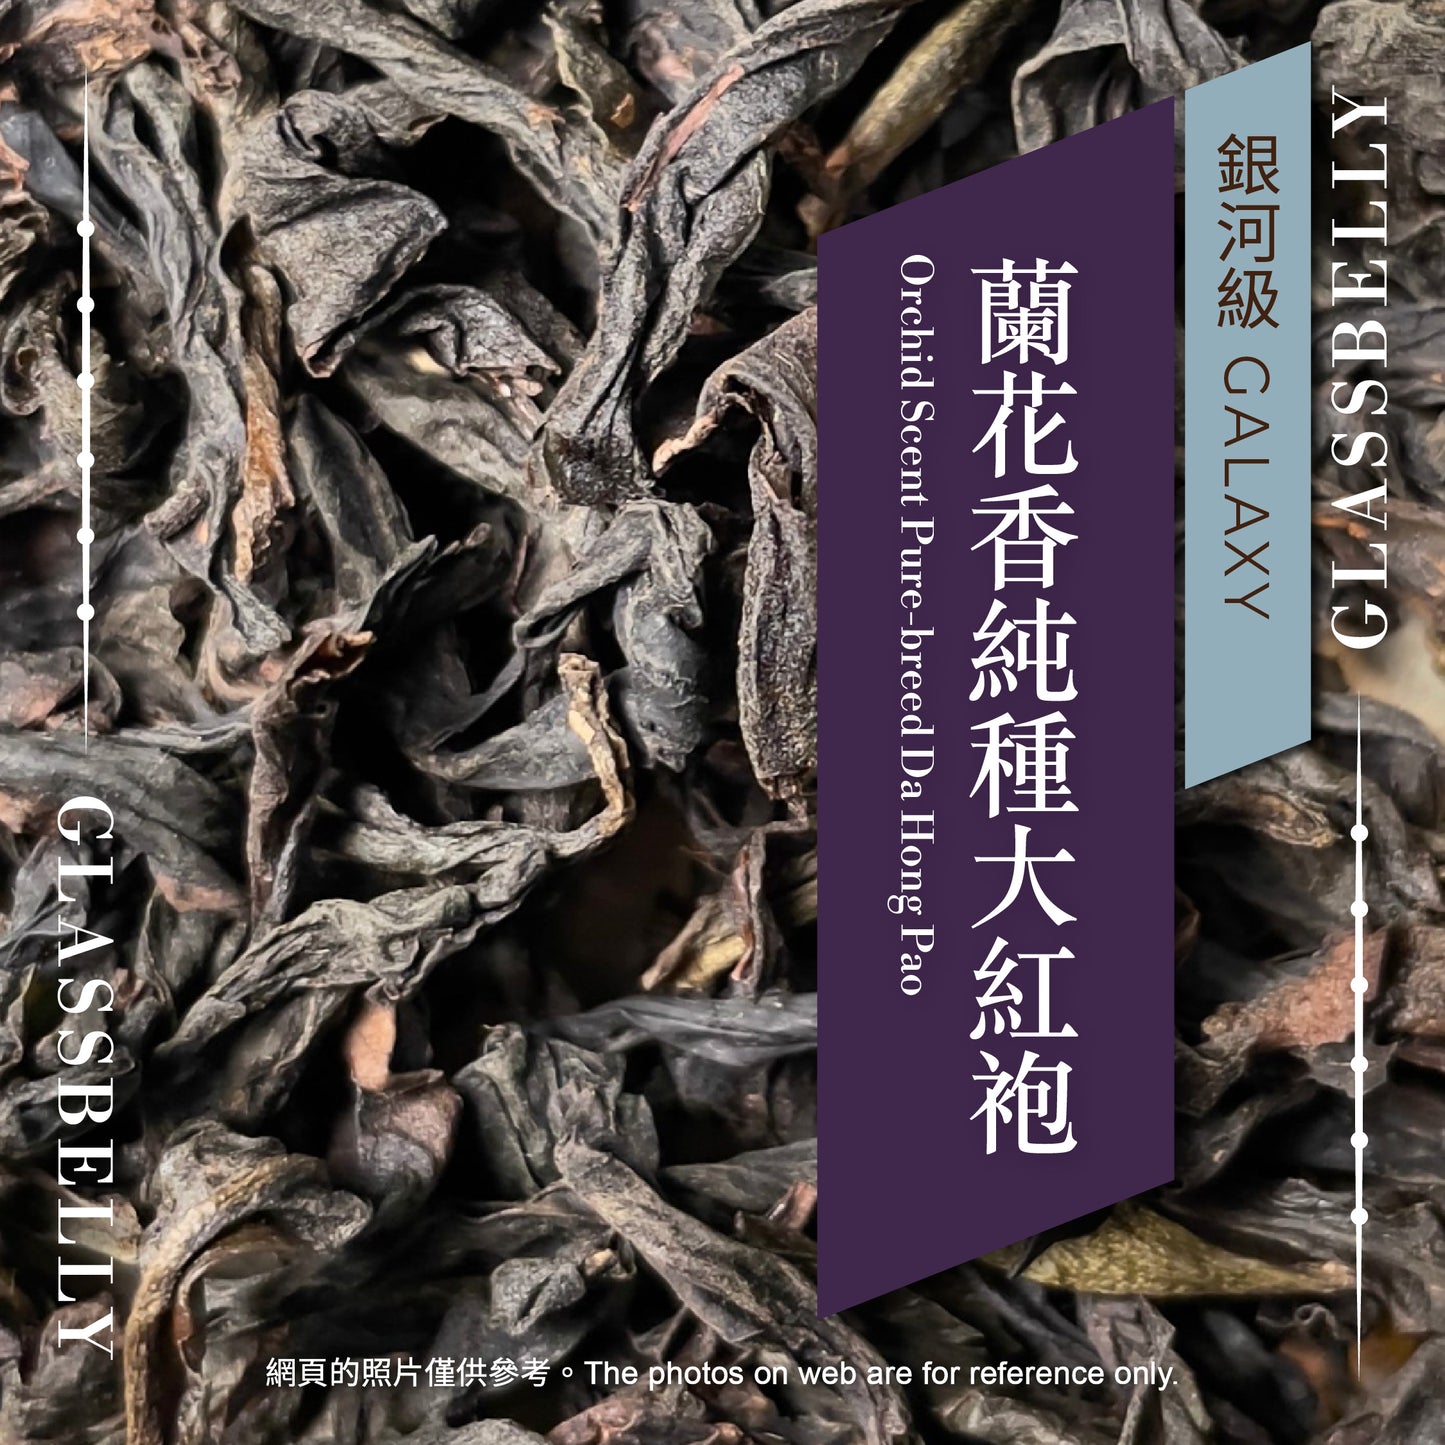 25g 蘭花香純種大紅袍 Orchid Scent Pure-breed Da Hong Pao